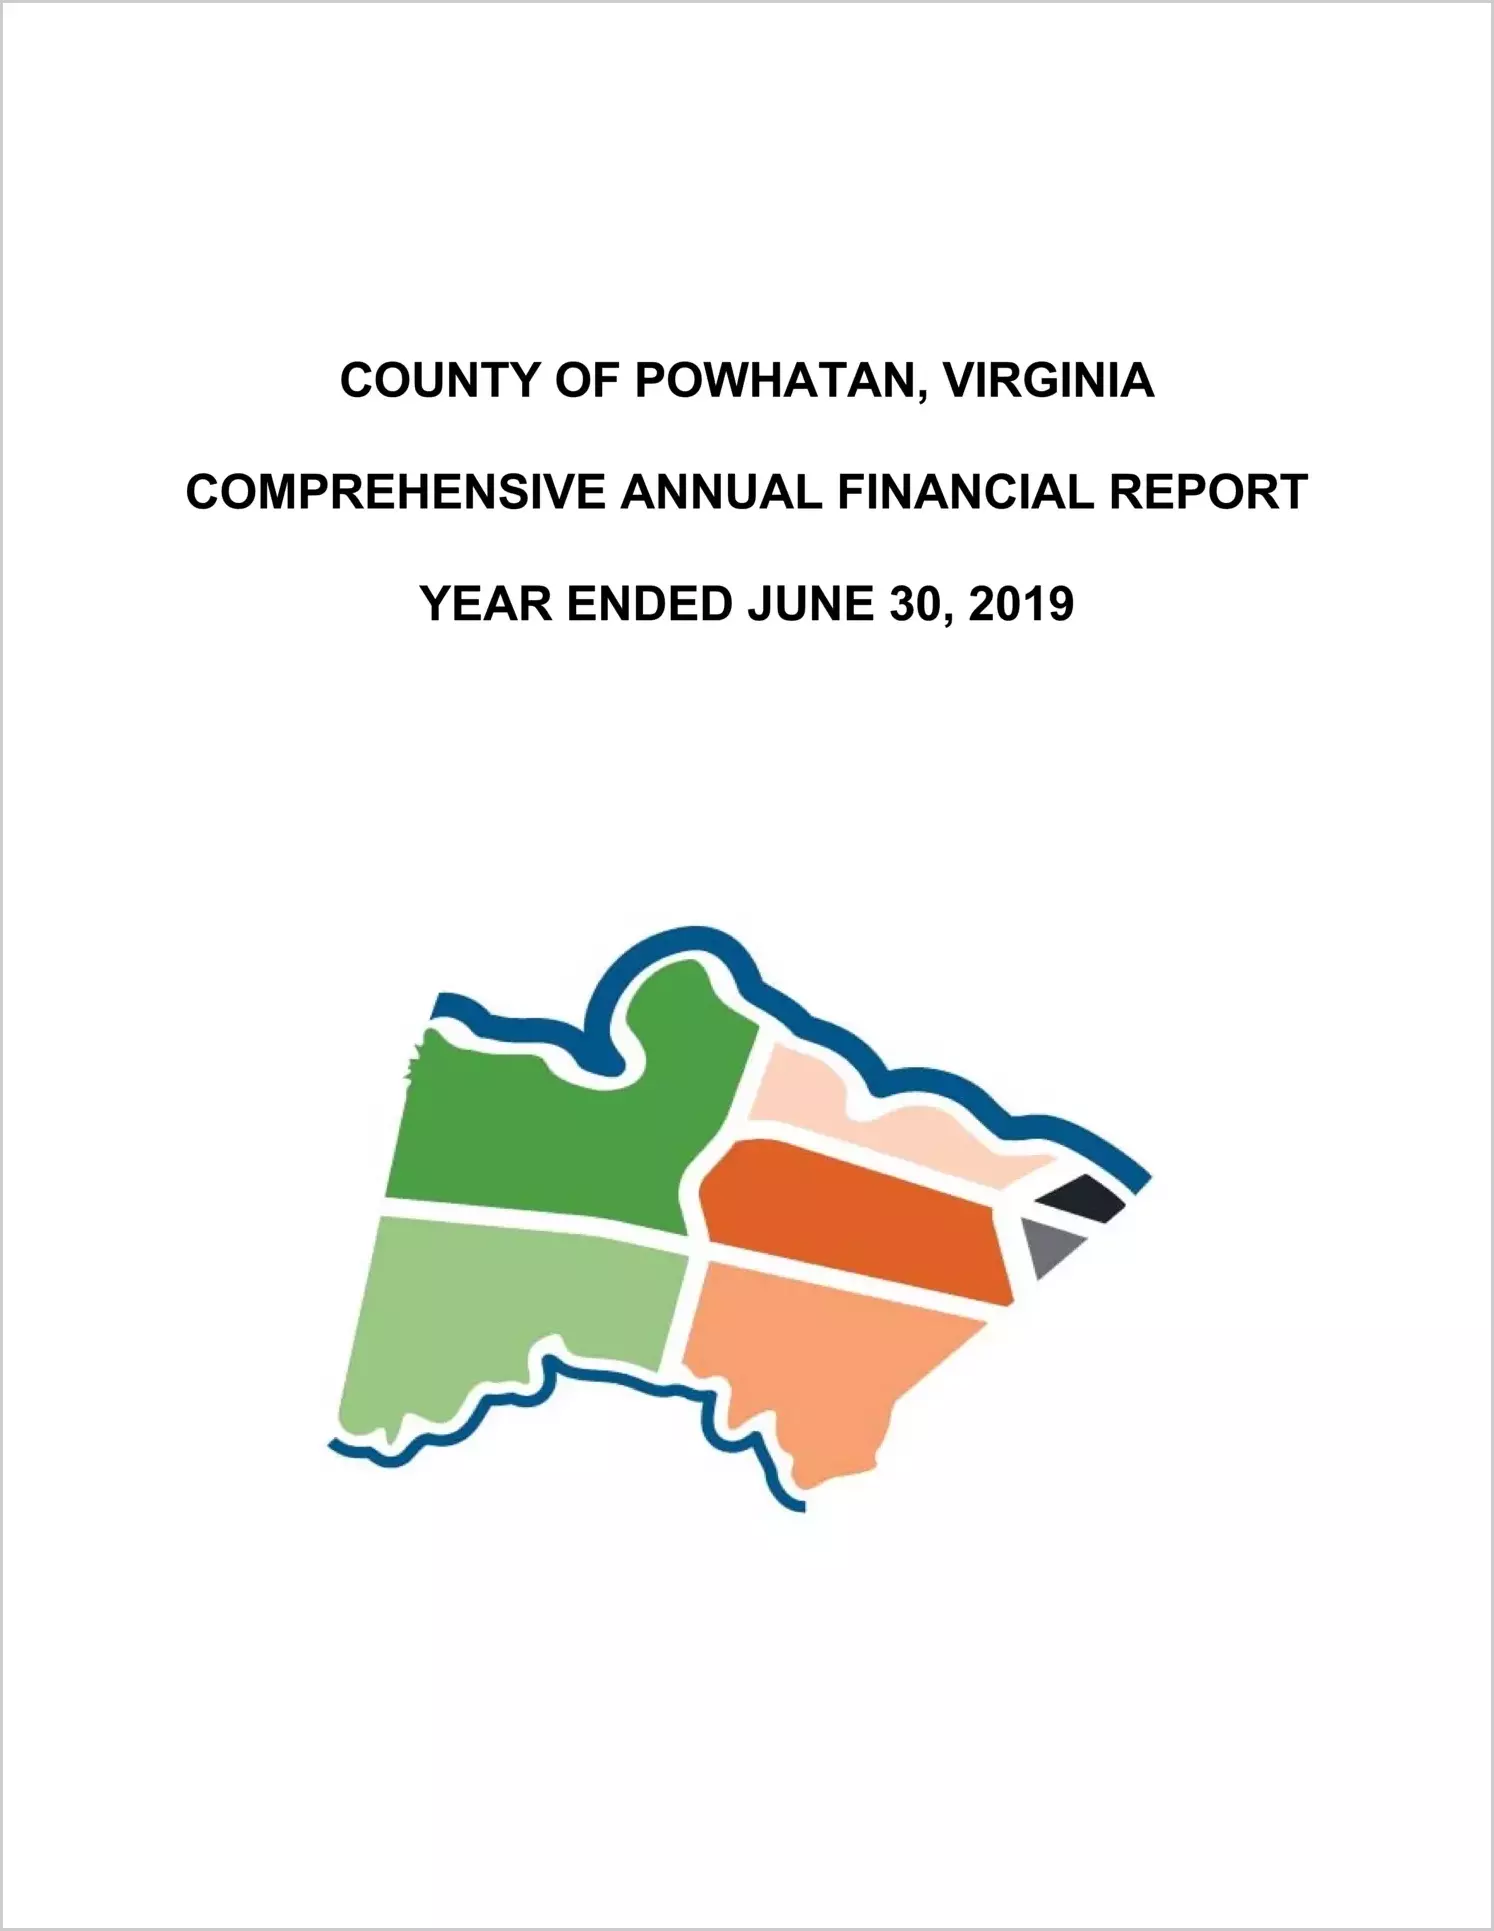 2019 Annual Financial Report for County of Powhatan